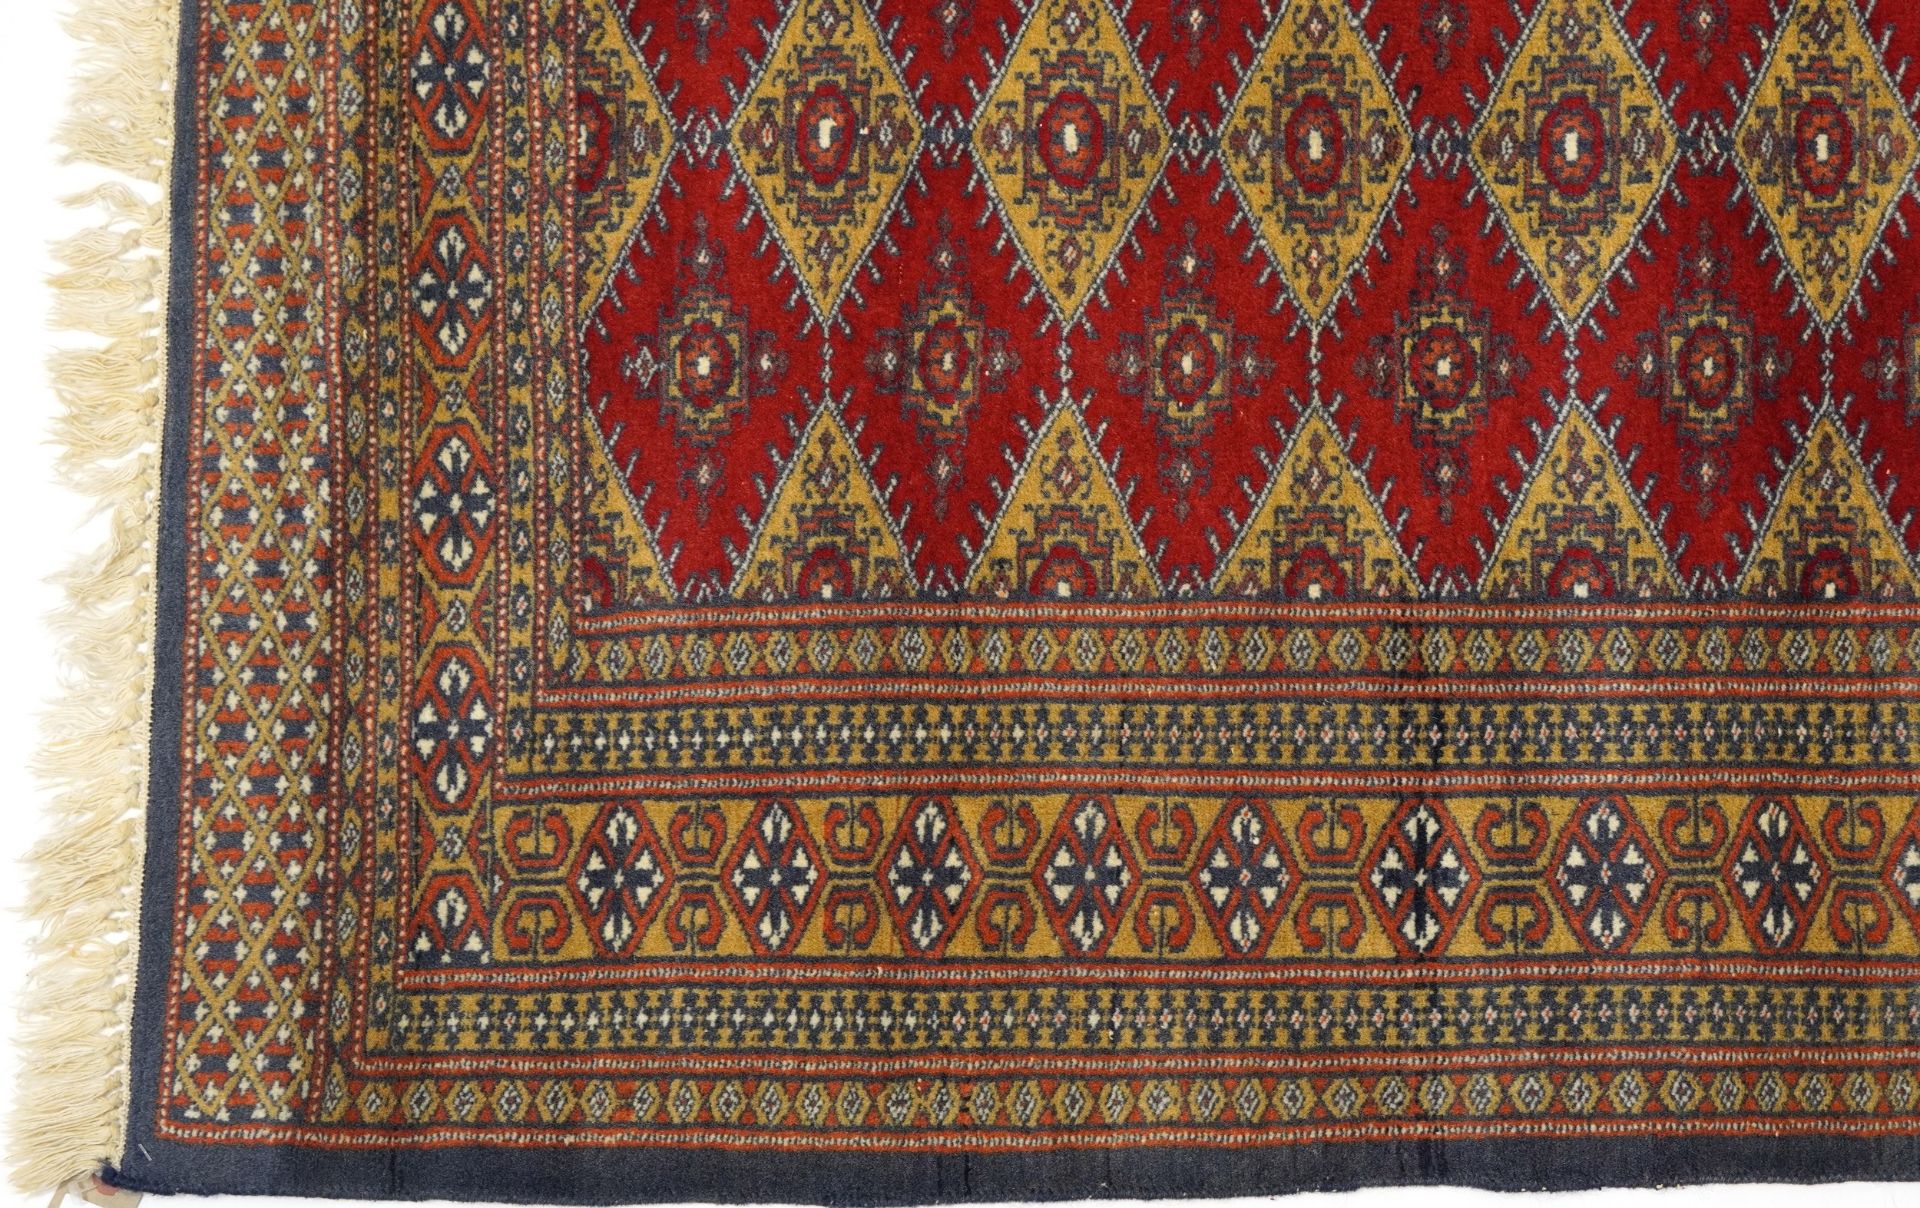 Rectangular red and blue ground rug with all over geometric design, 145cm x 91cm - Image 4 of 6